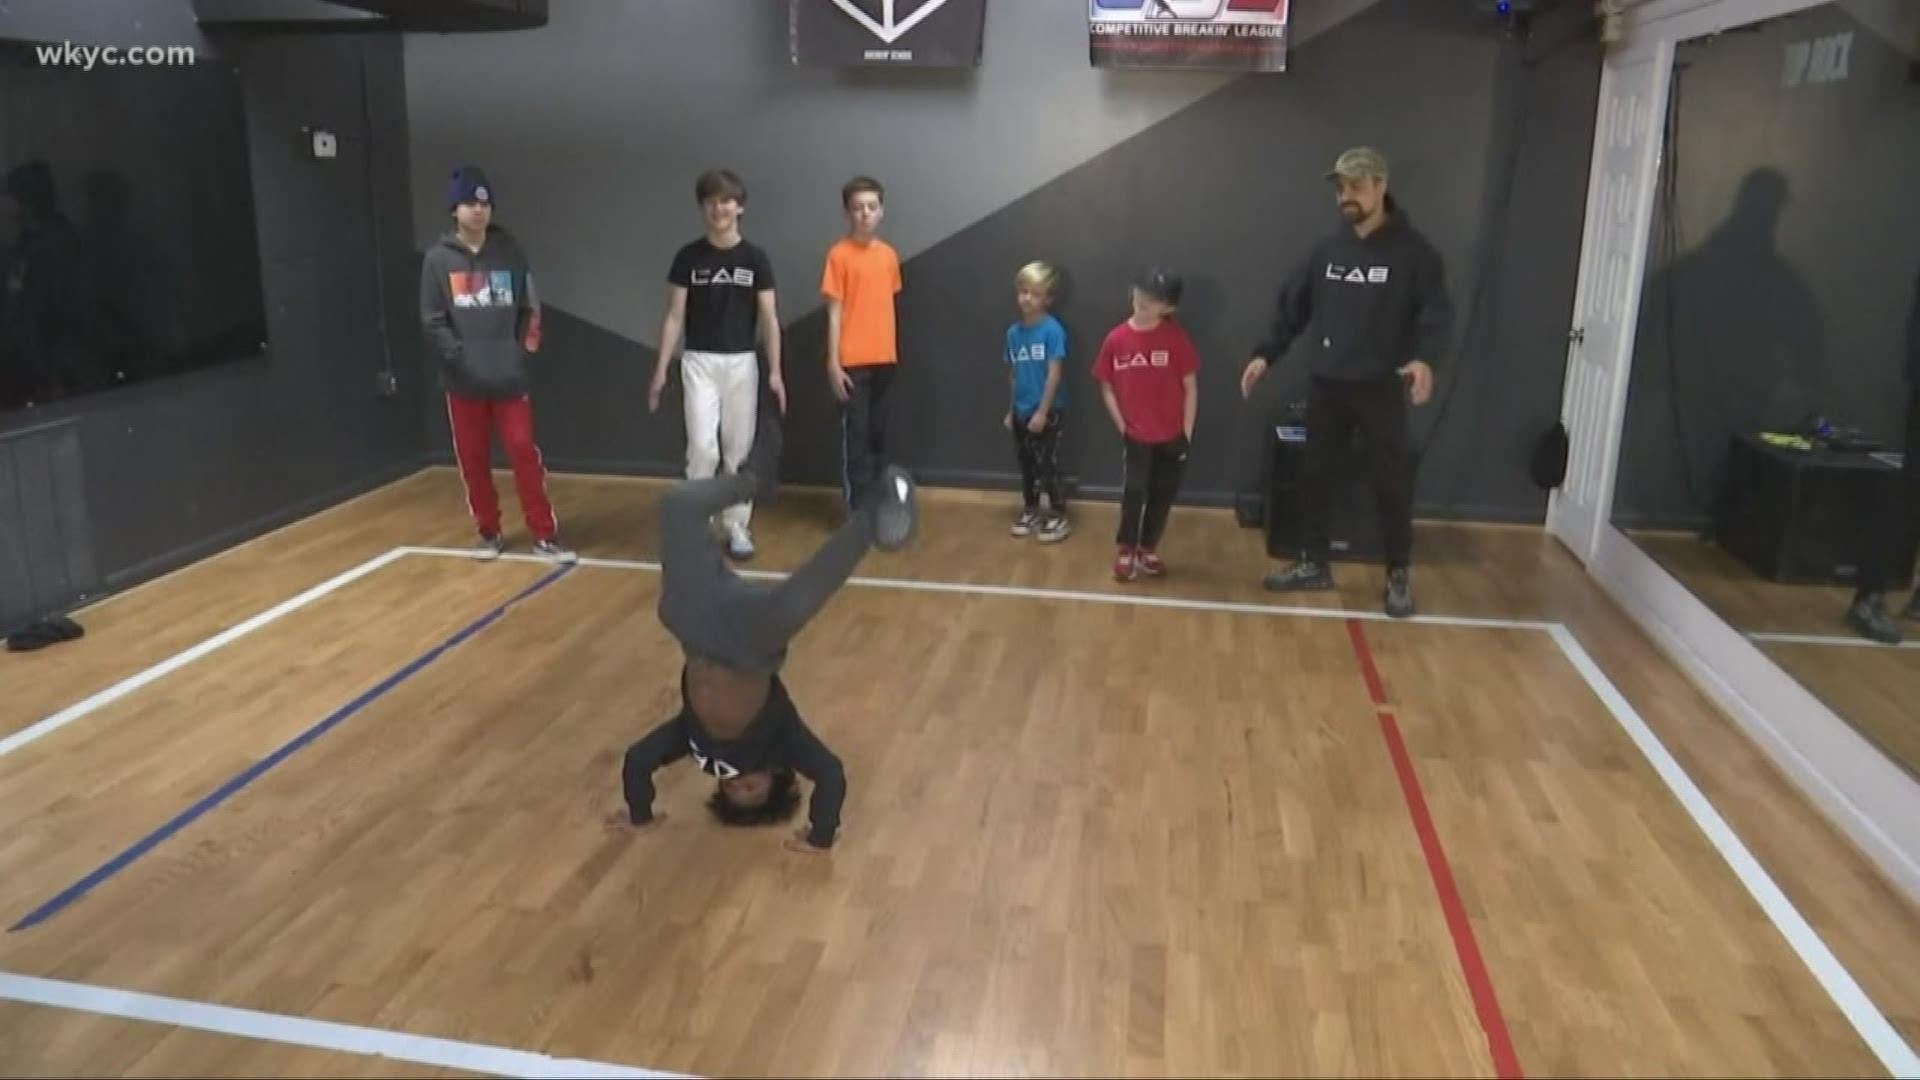 Break dancing to official Olympic sport